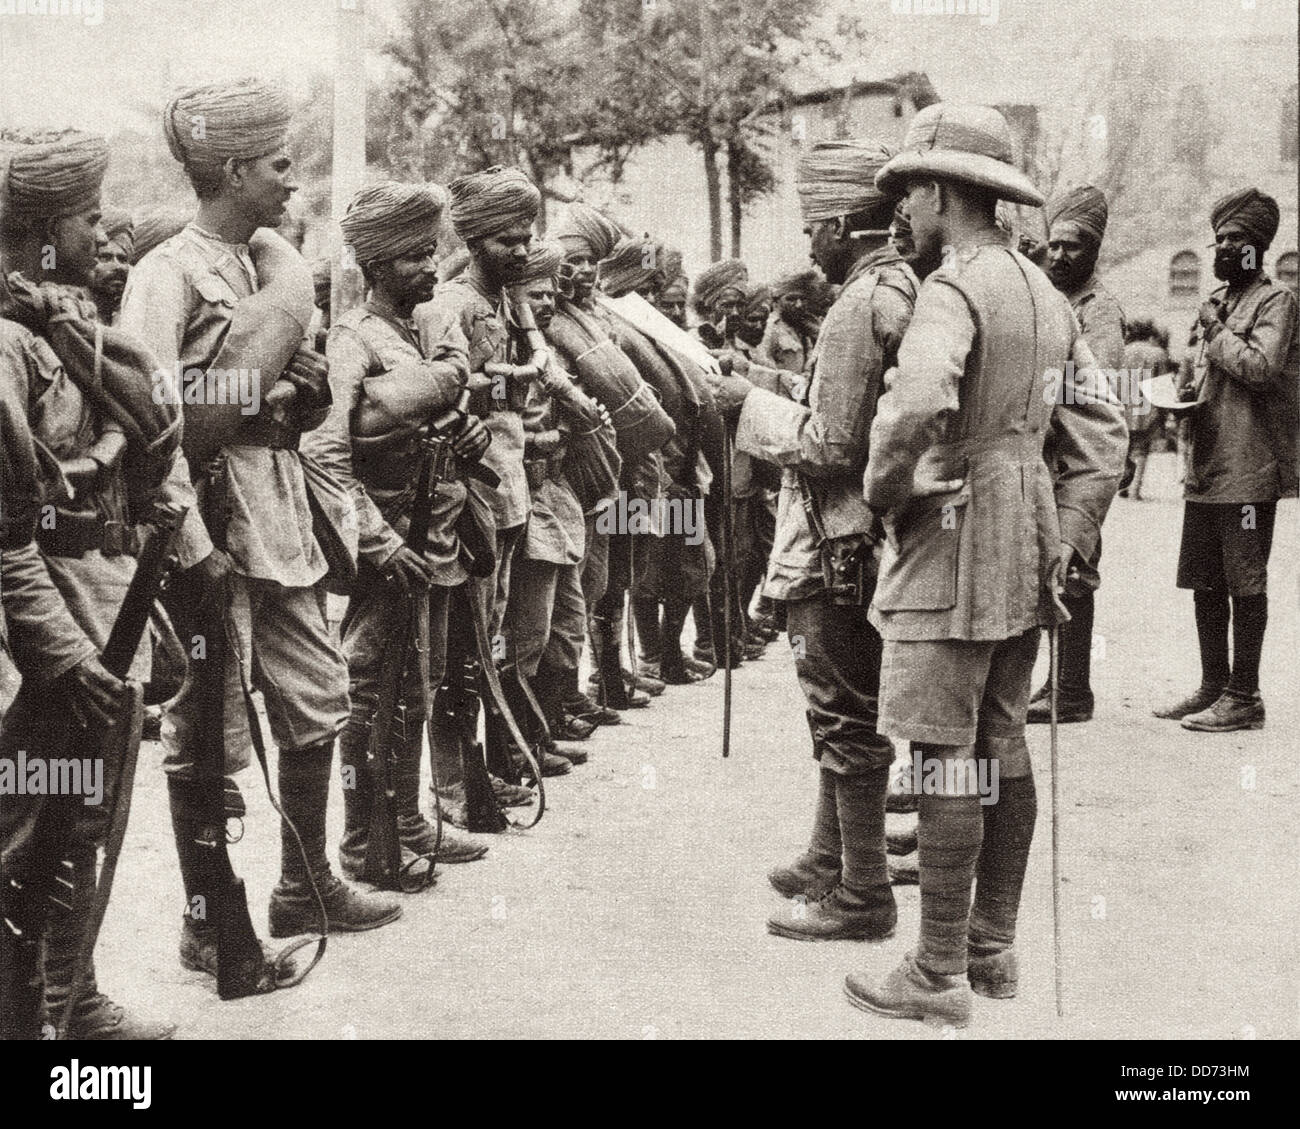 Indian troops replacing 10,000 British troops captured by the Turks in Iraq. 1916. The British forces were surrounded by the Stock Photo